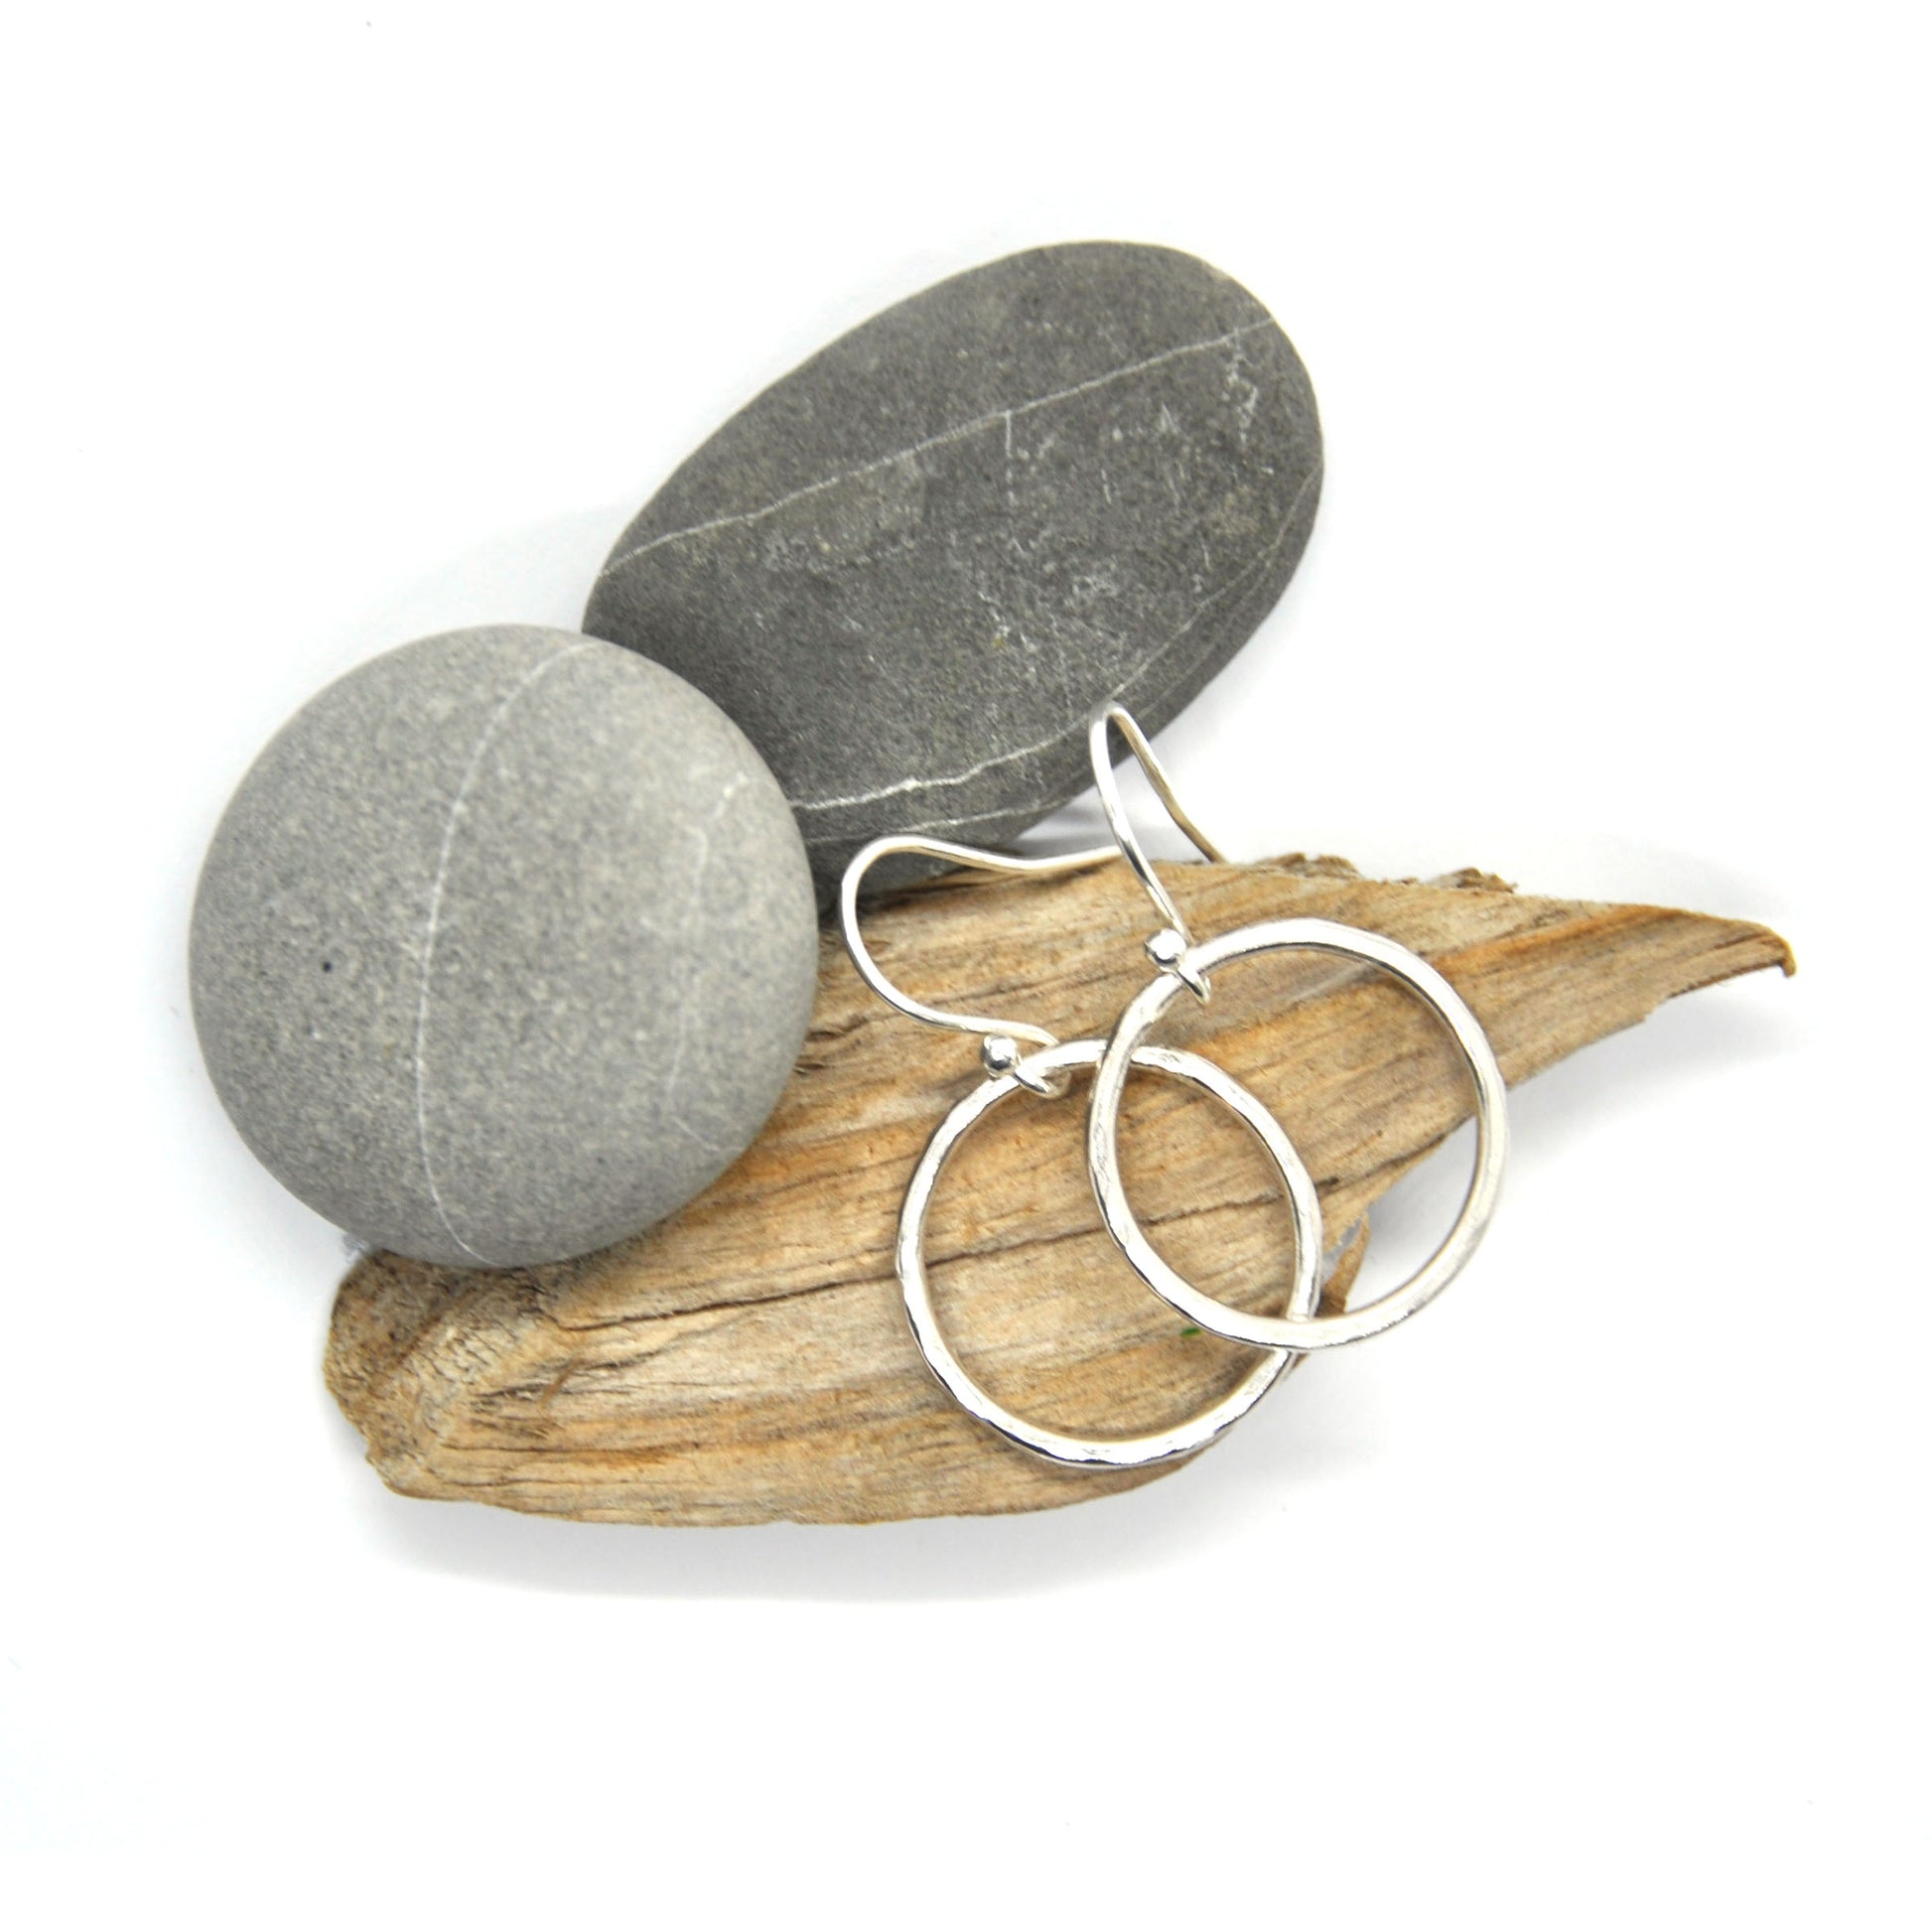 Sterling silver open circle drop earrings with hammered finish - large. On wood and pebbles.